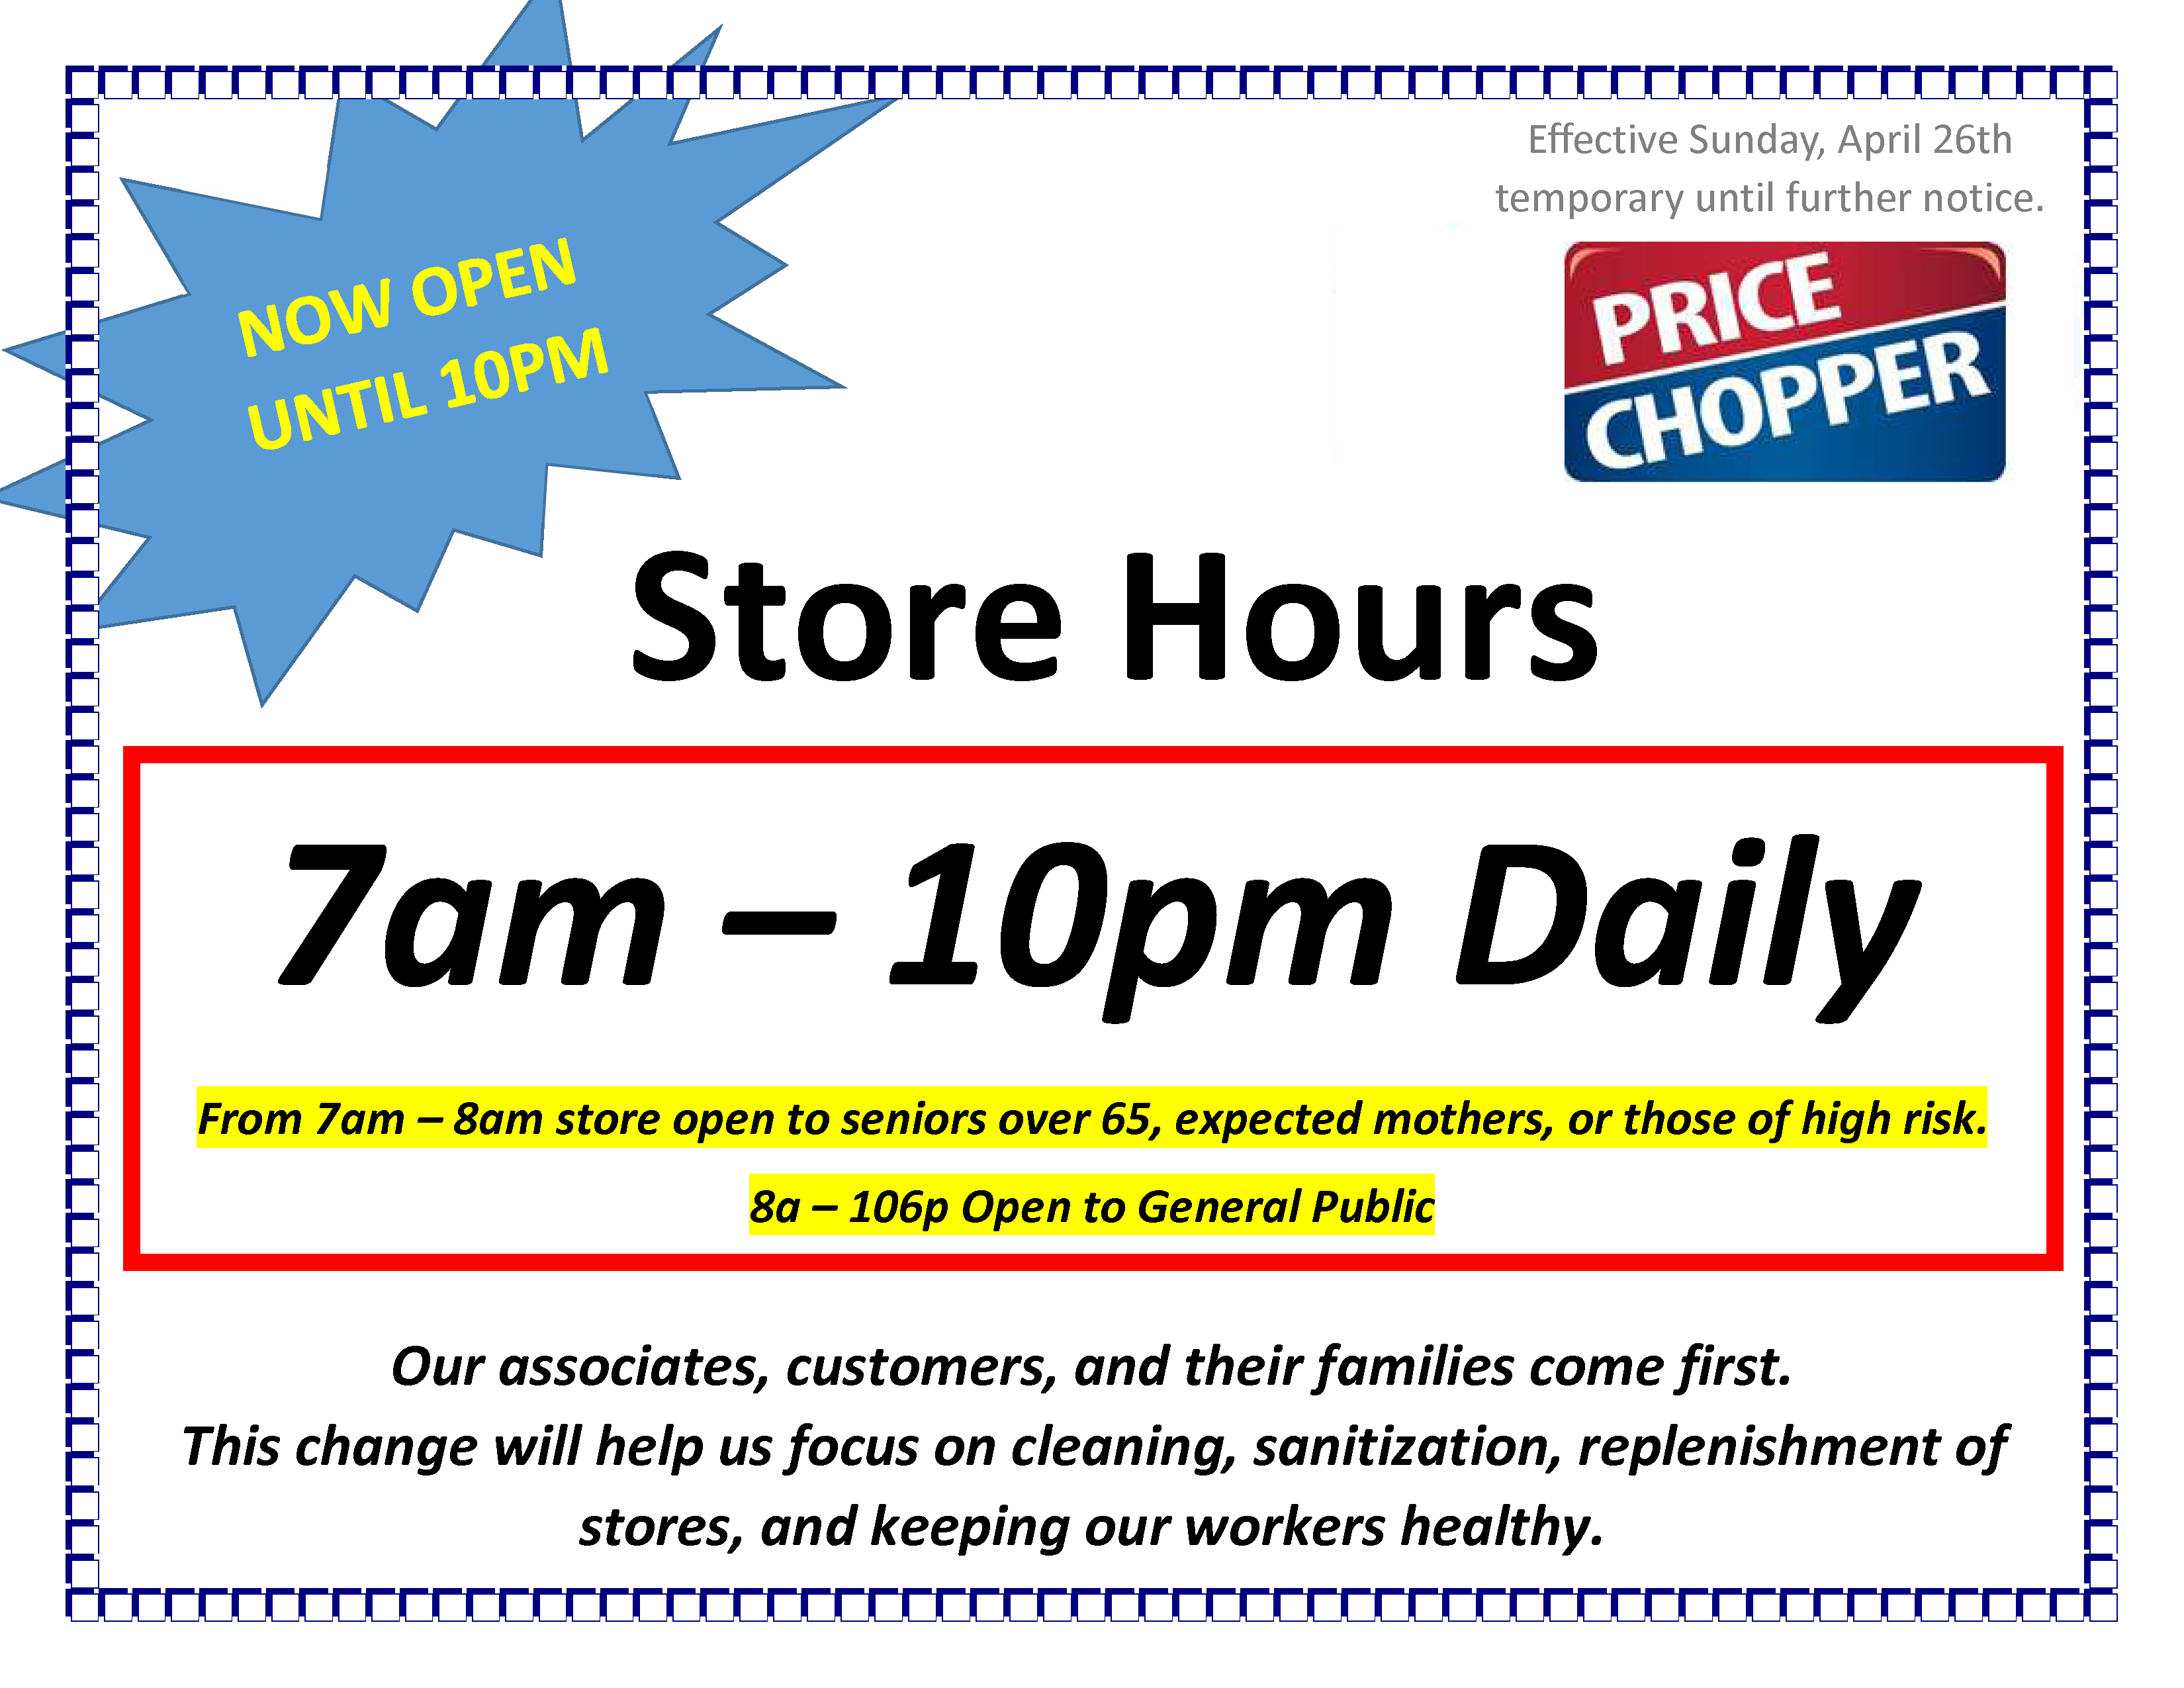 Temporary Store Hours Change